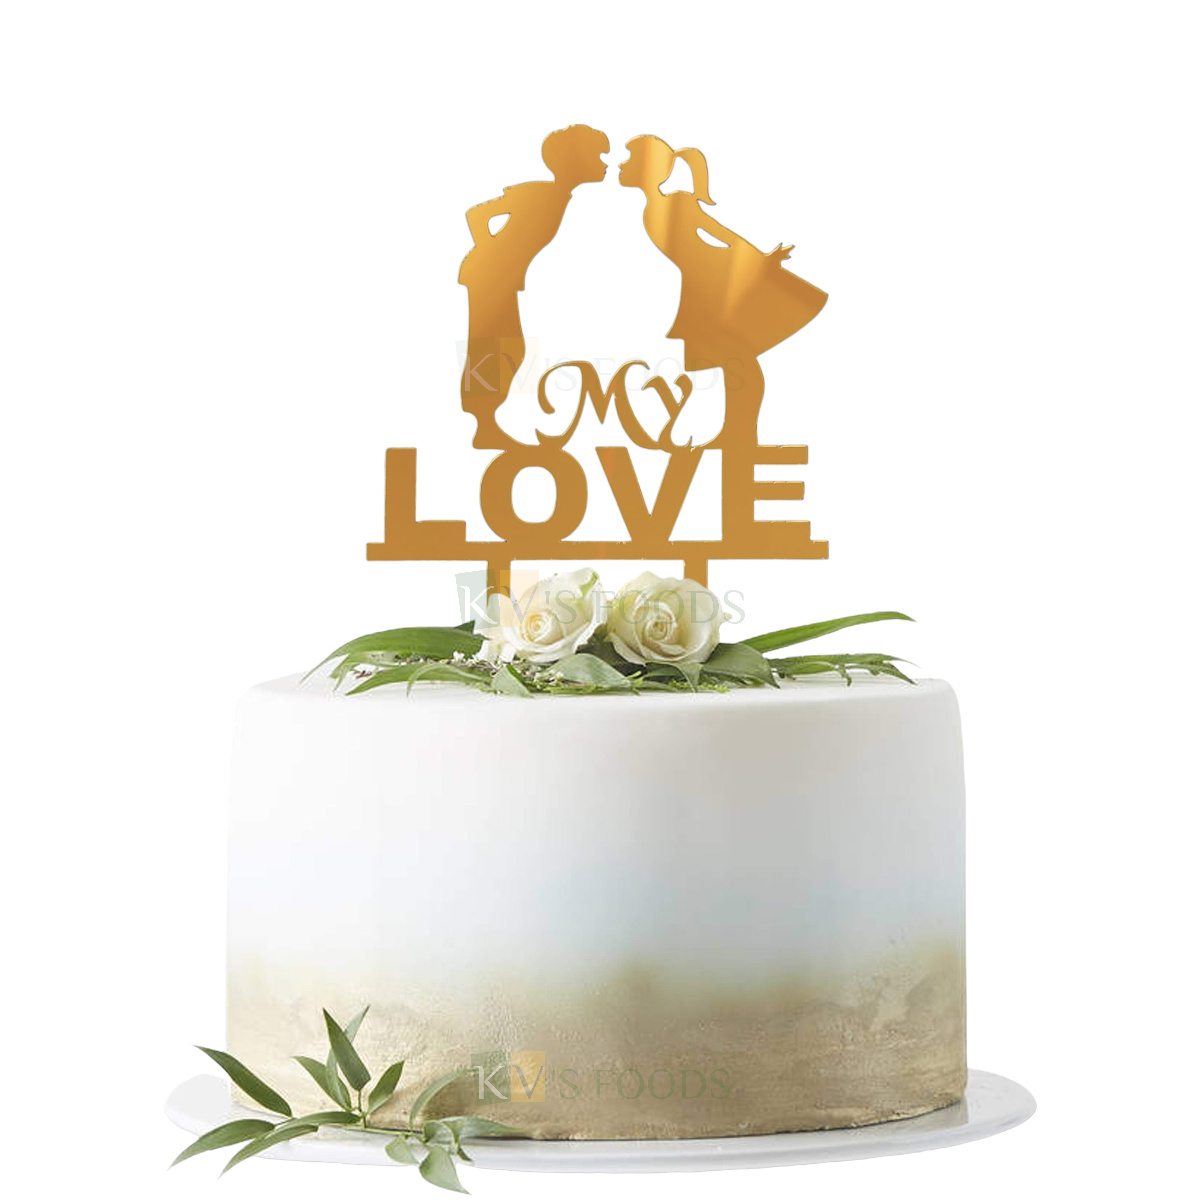 1PC Golden Acrylic Shiny Glass Finish Couple Kissing Each Other My Love Letters Cake Topper, Love Valentine's Day Theme Cake Insert, Unique Elegant Font Design Cake Topper DIY Cake Decoration